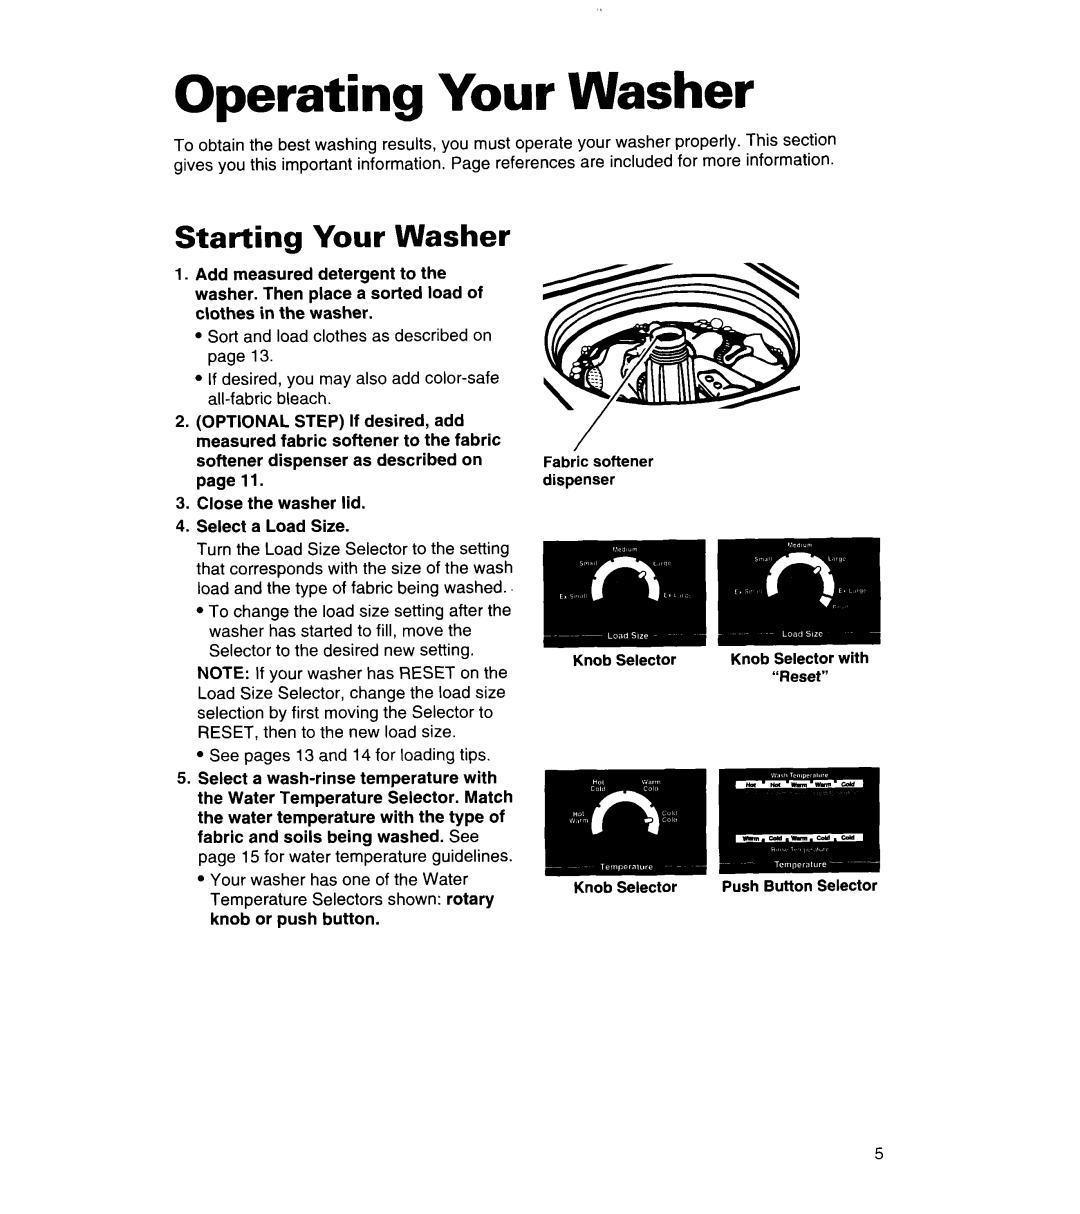 Whirlpool 3360464 warranty Operating Your Washer, Starting Your Washer 